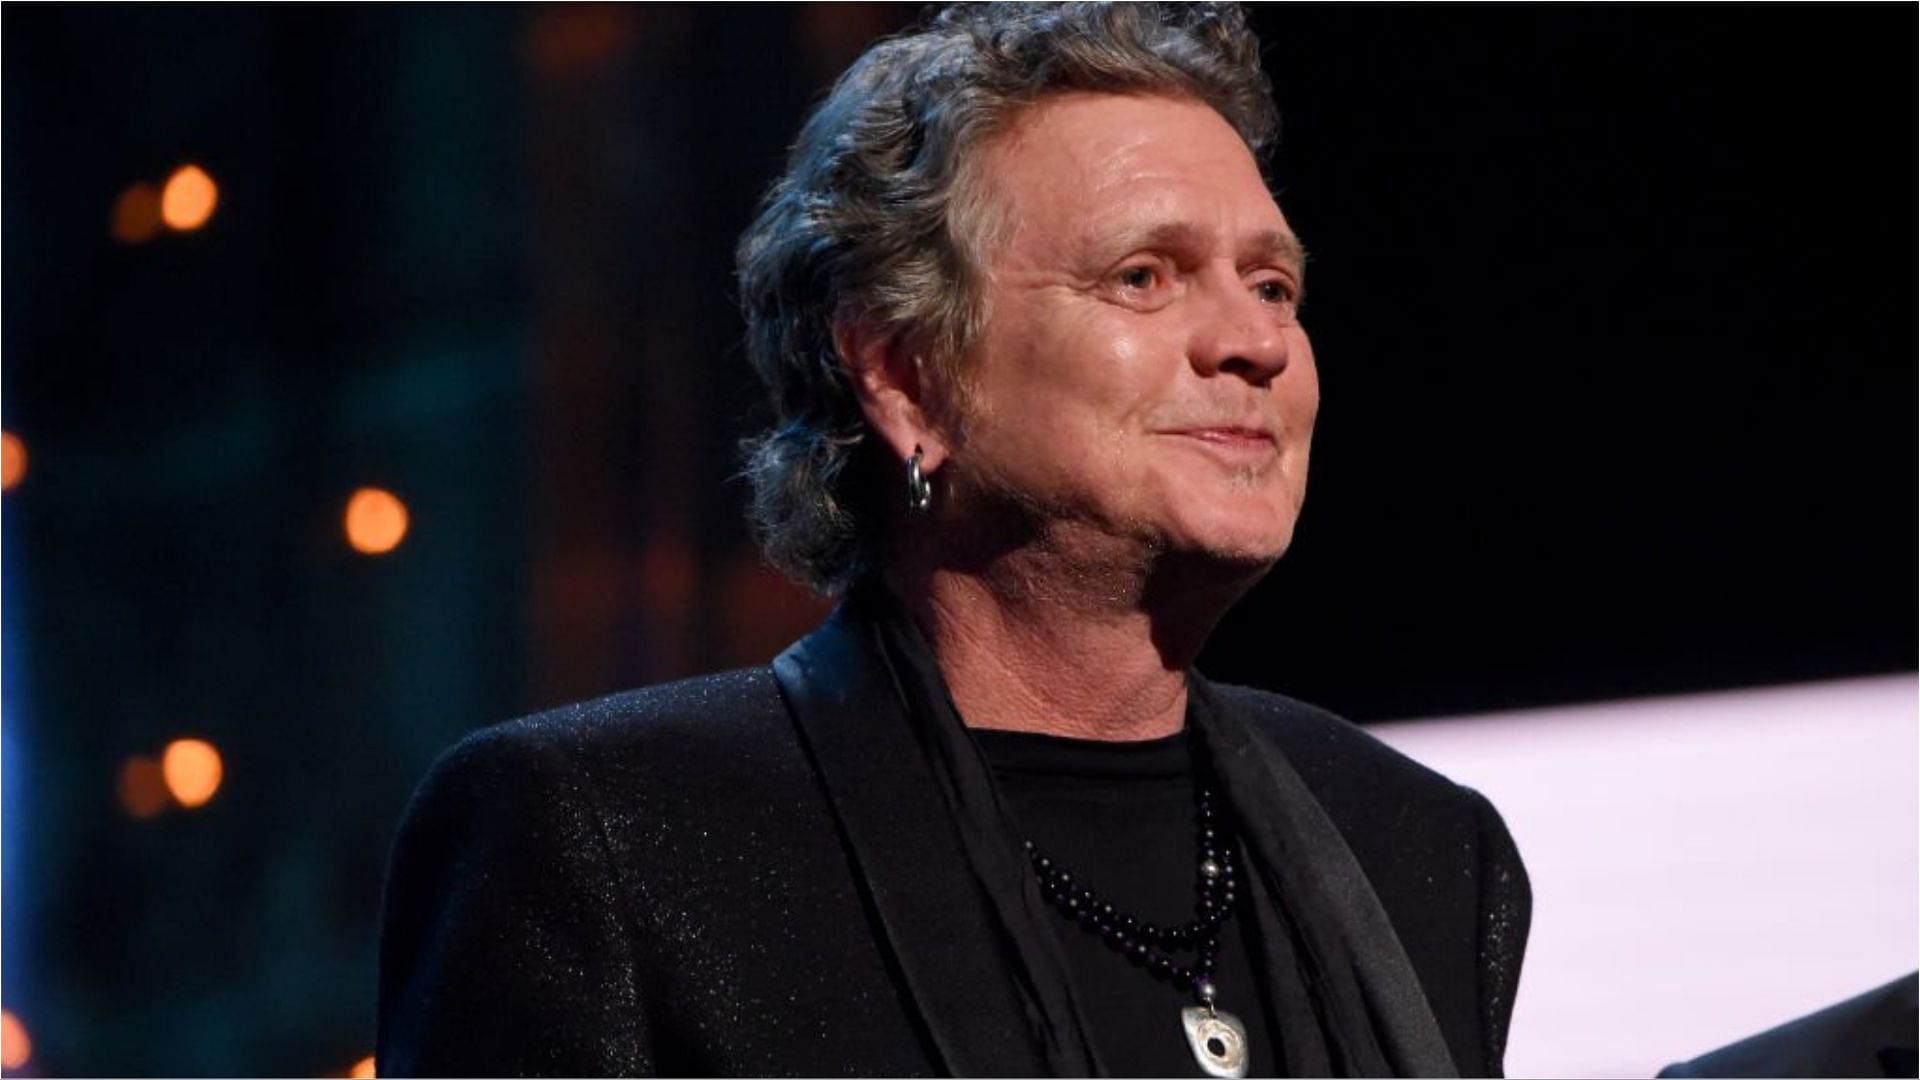 Rick Allen&#039;s fans reacted to his assault incident on Twitter (Image via Kevin Mazur/Getty Images)